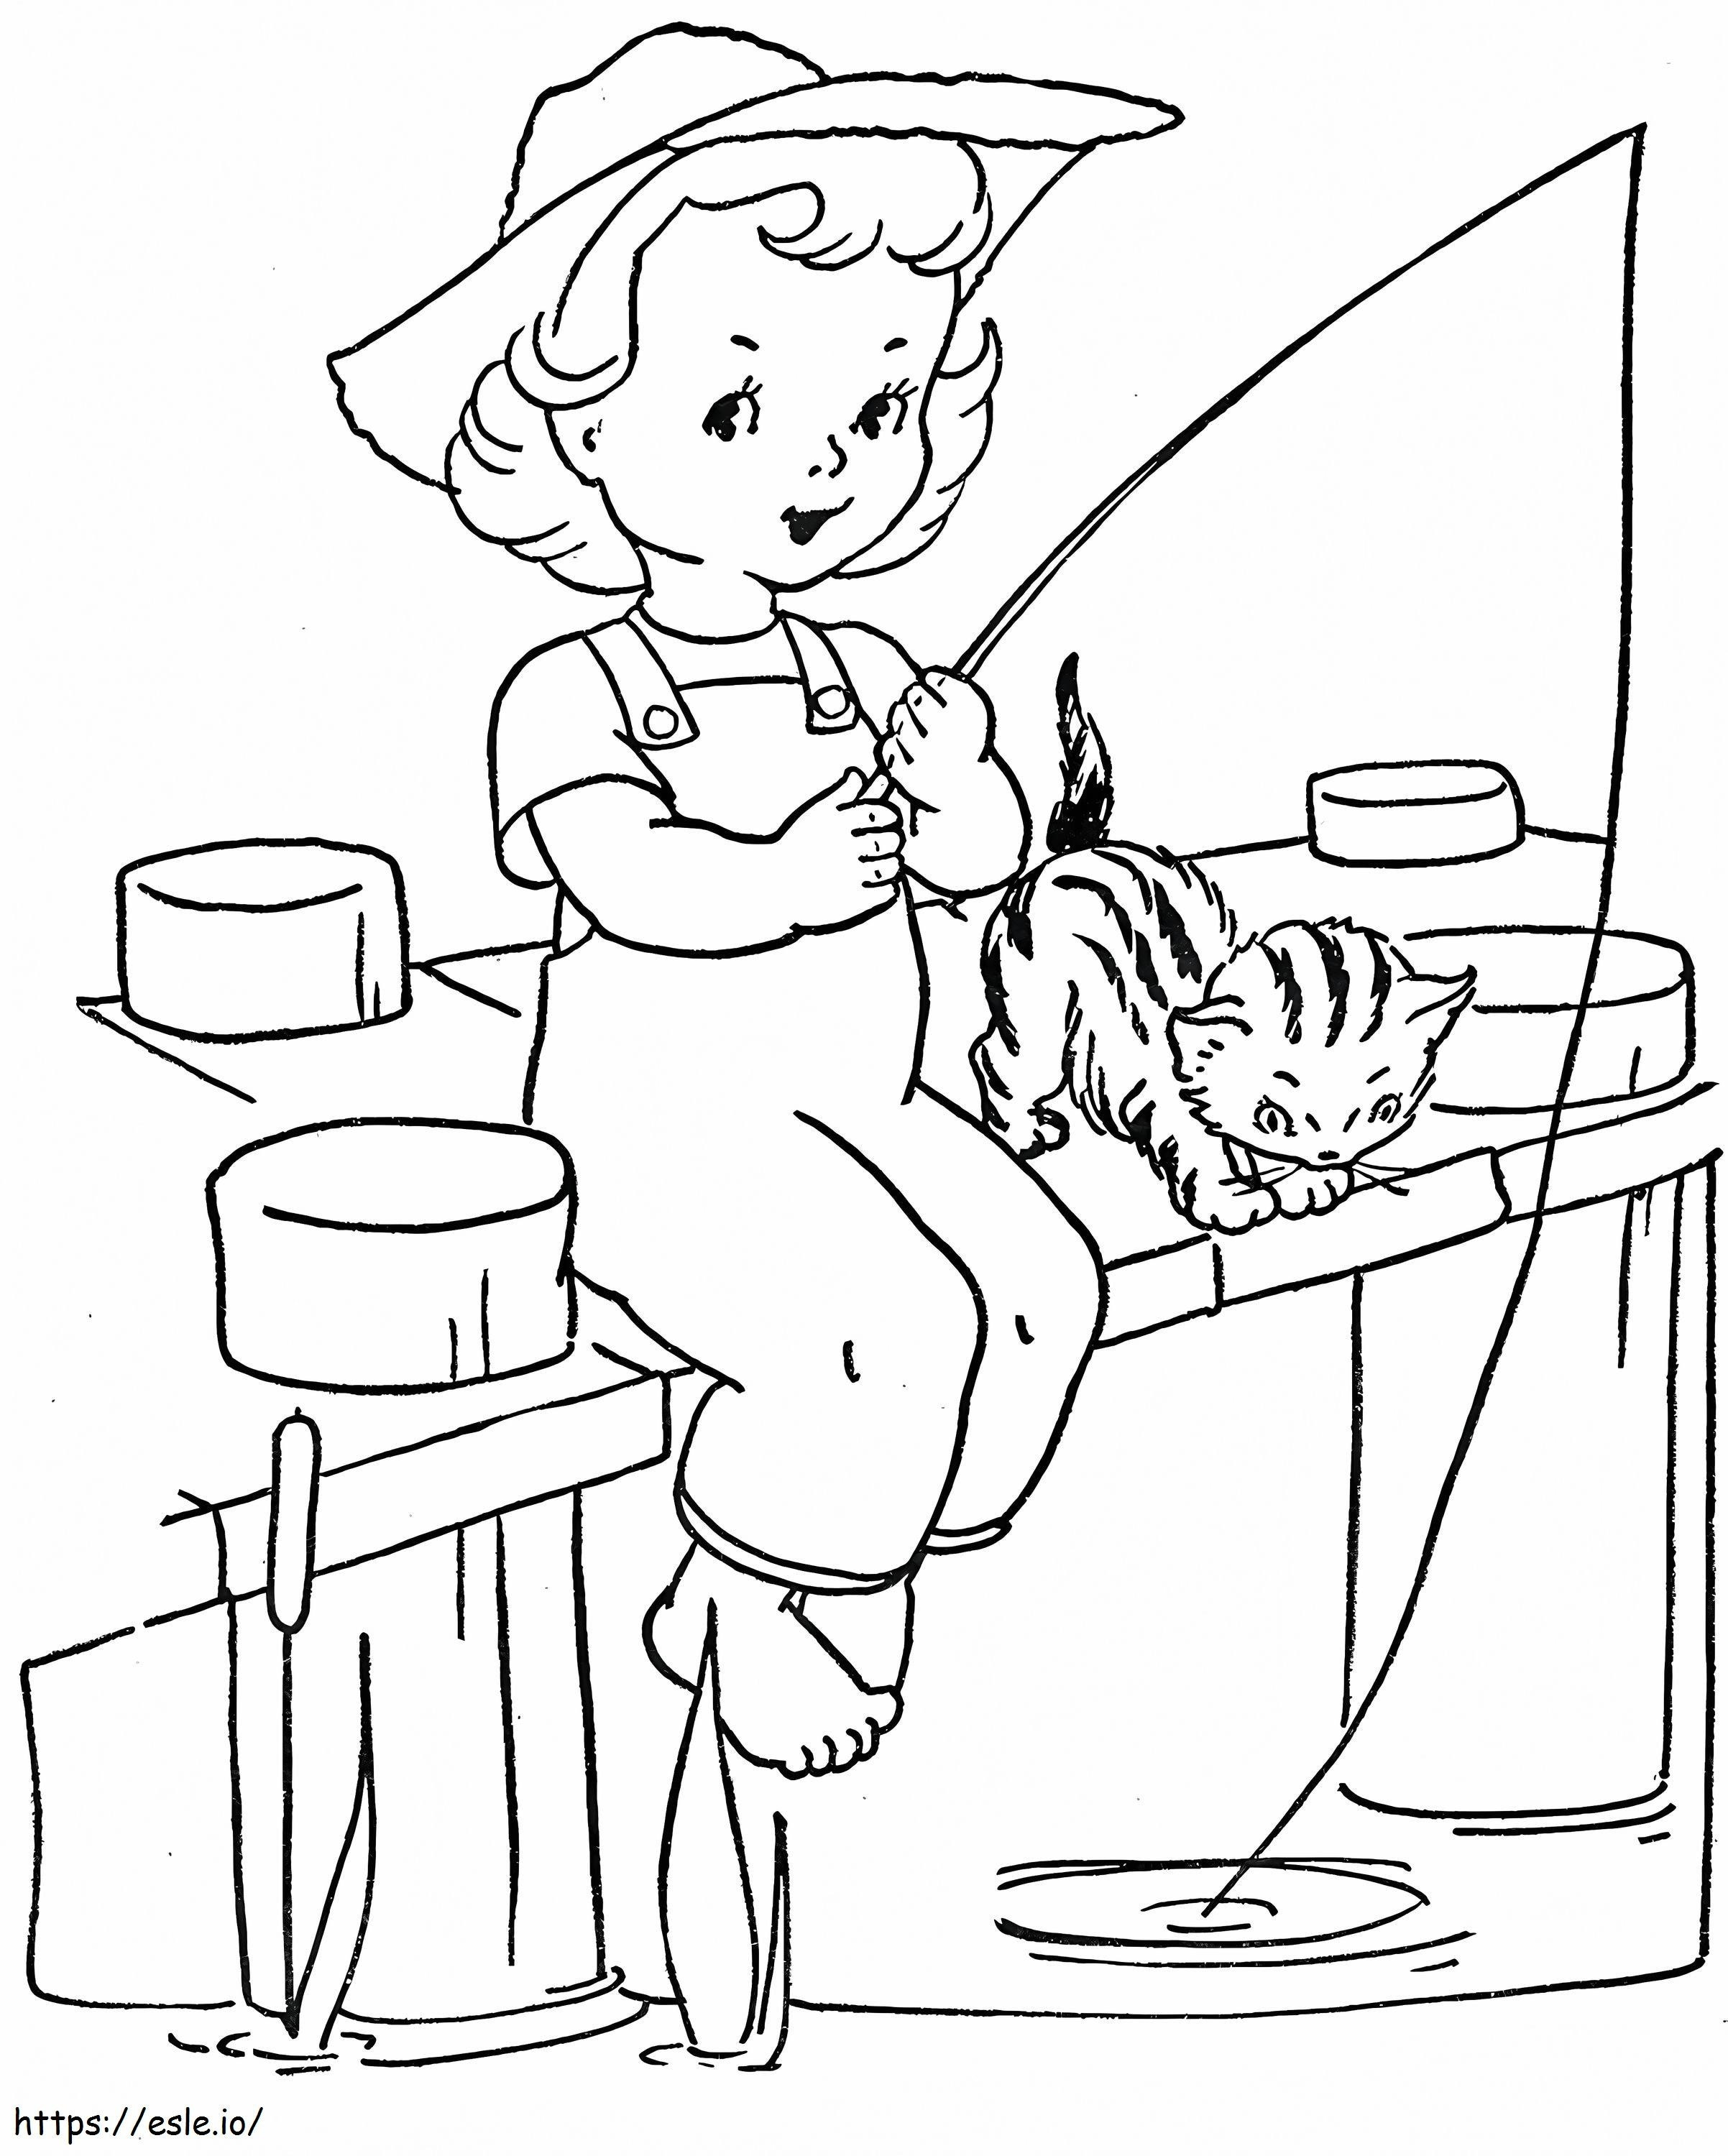 Little Girl Fishing With Cat coloring page